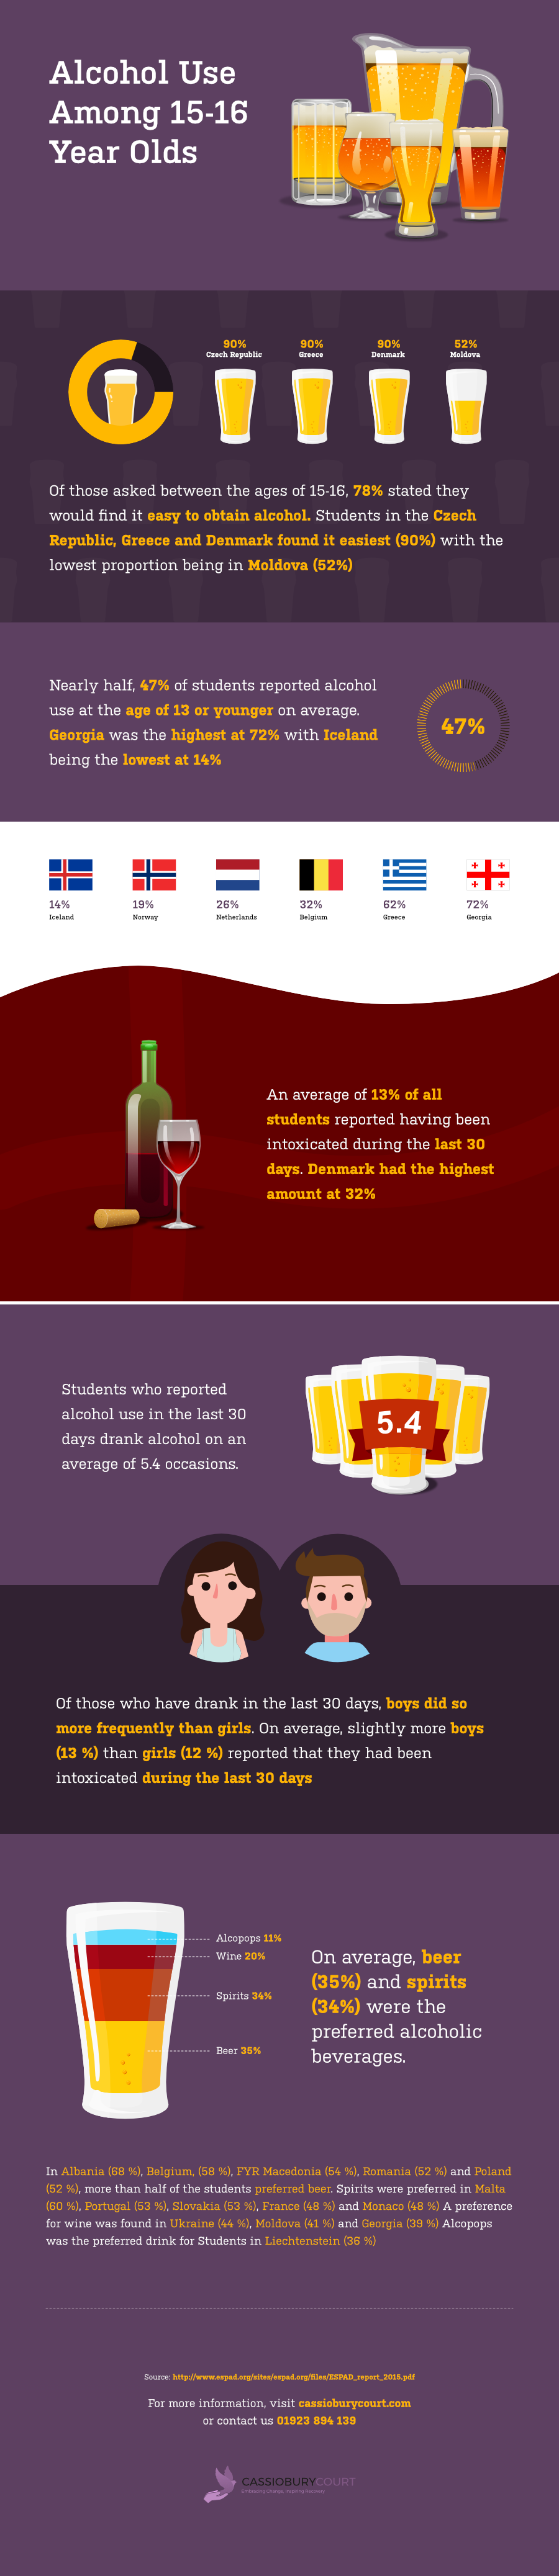 Alcohol consumption by 15-16 year old's